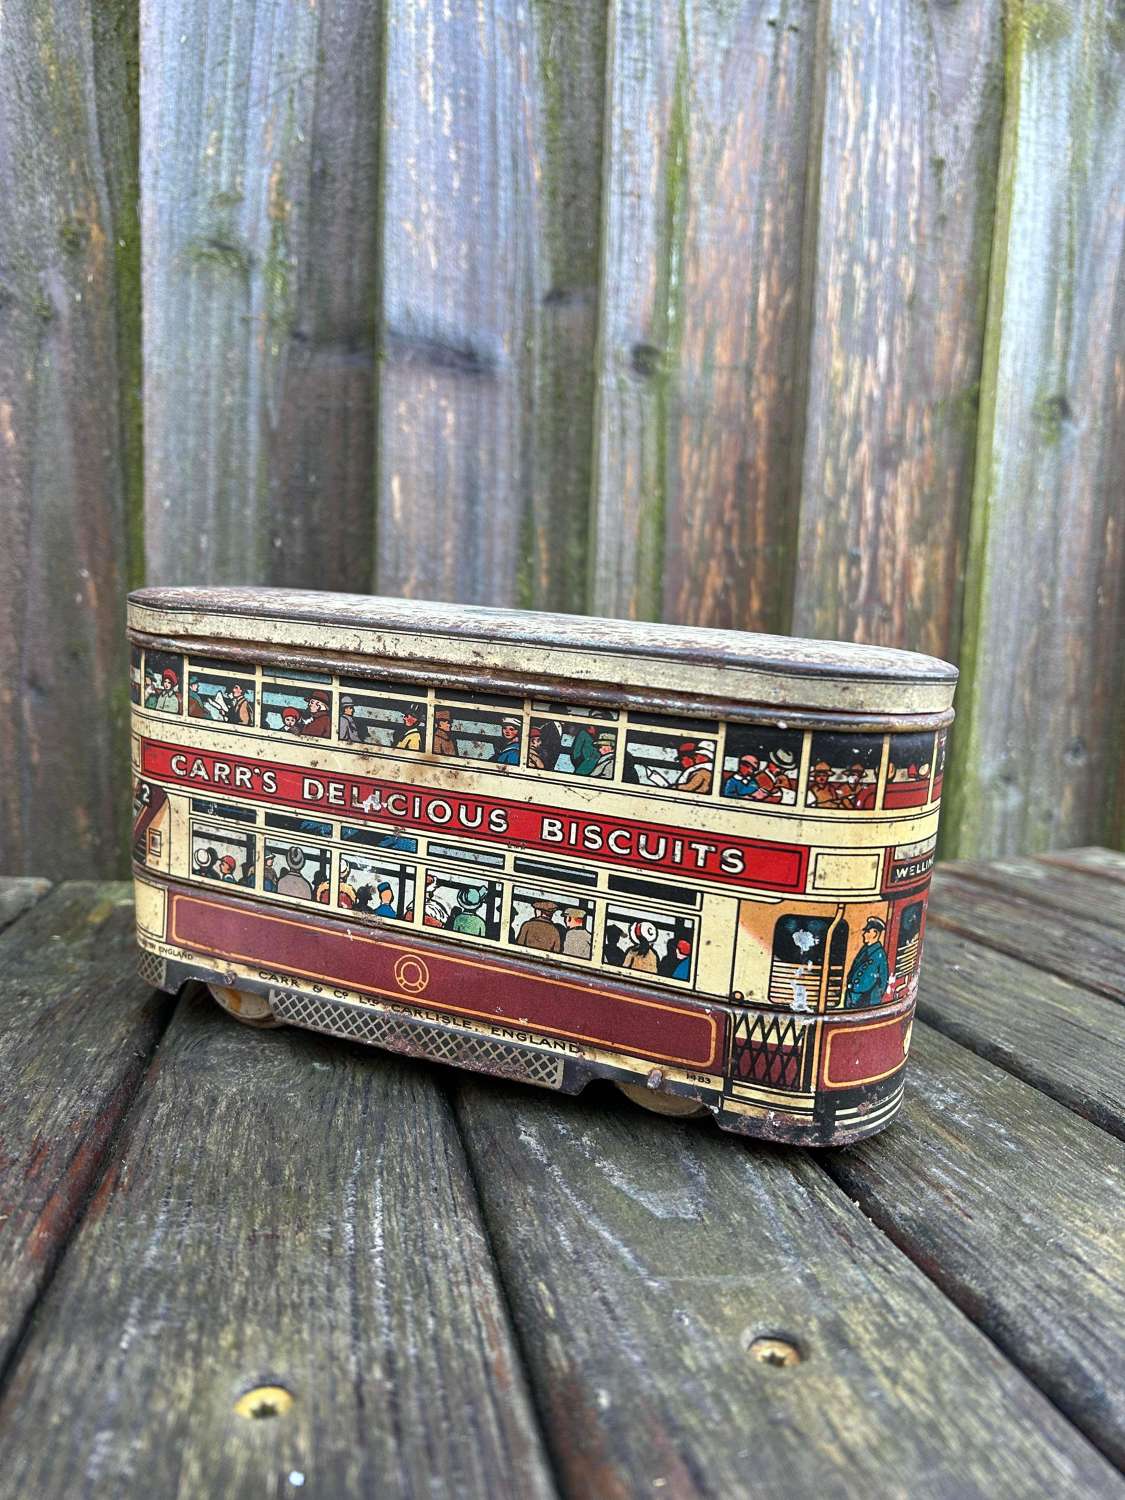 Very rare example of a carrs biscuit tram tin